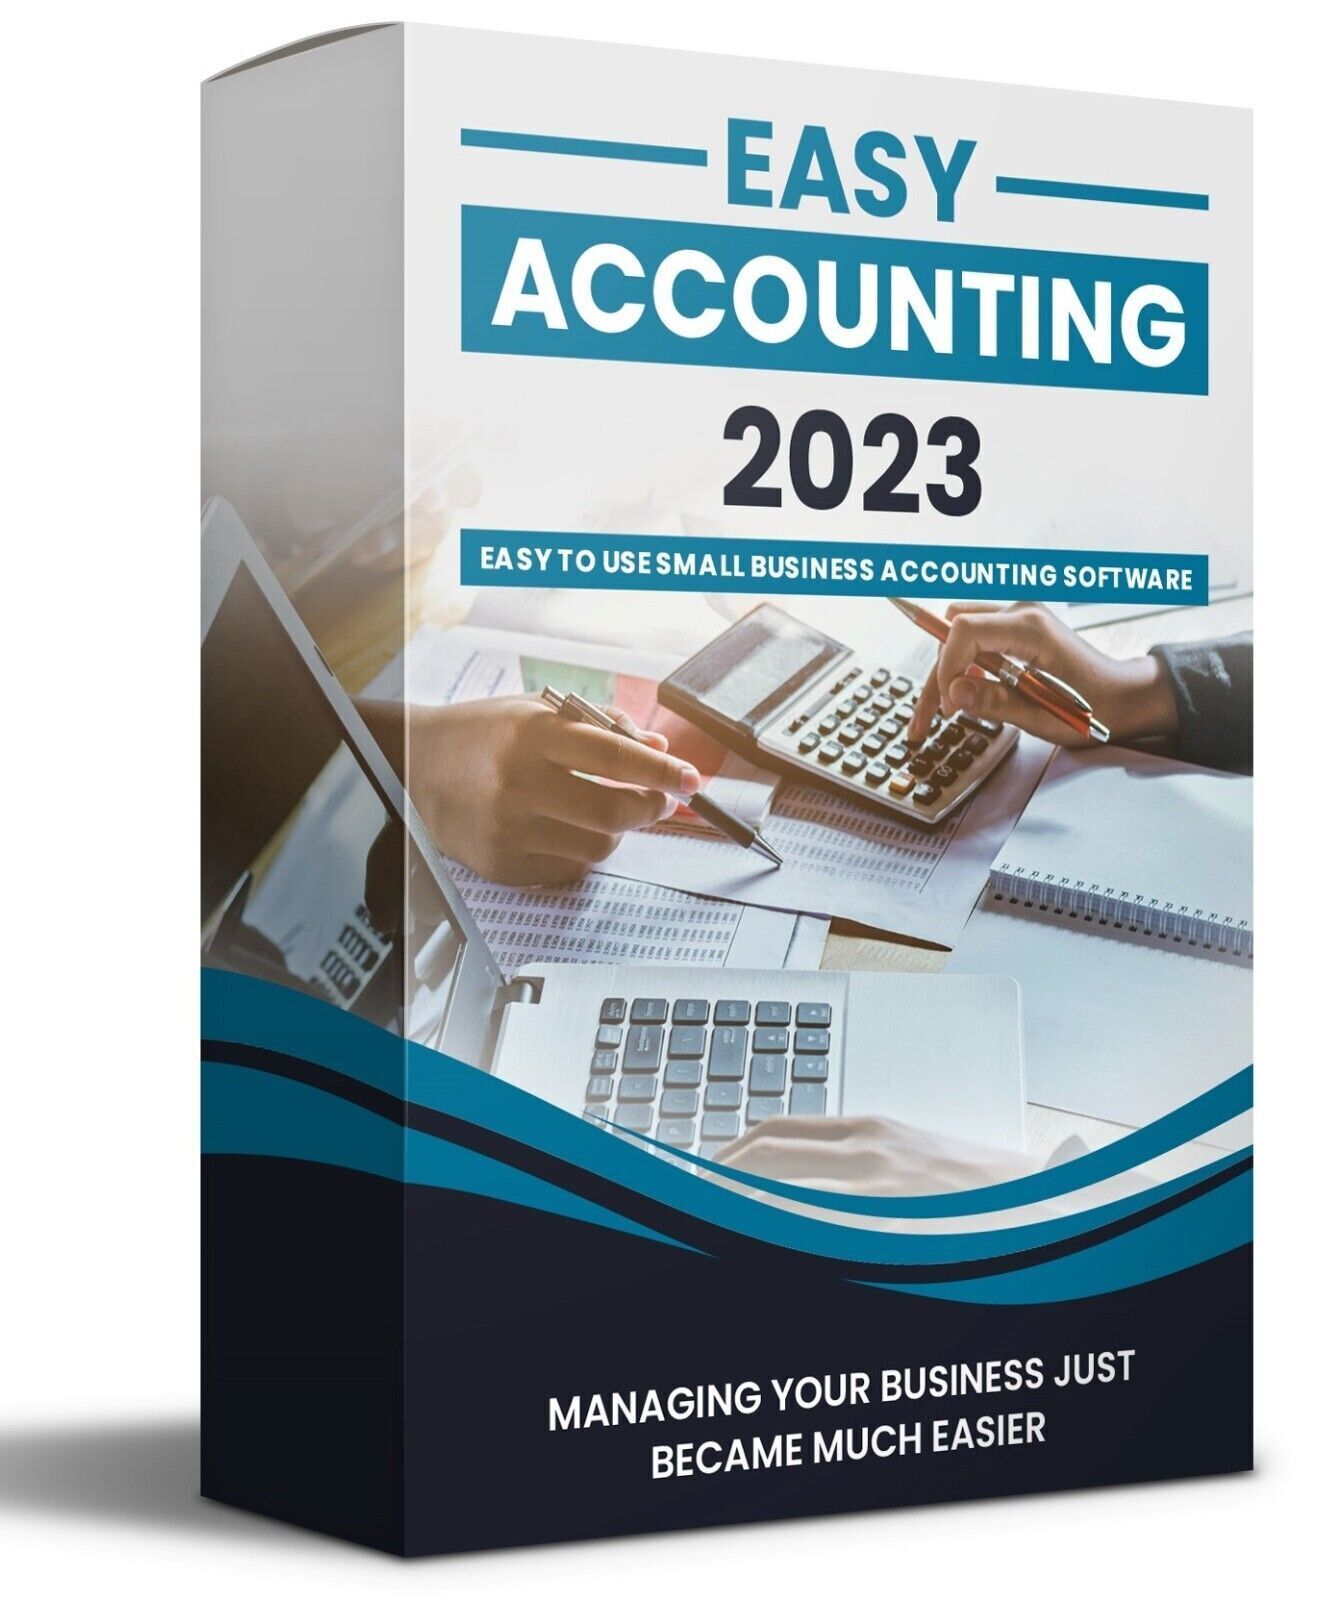 Accounting Small Business Accounts Software App Bookkeeping Tax Filing IRS